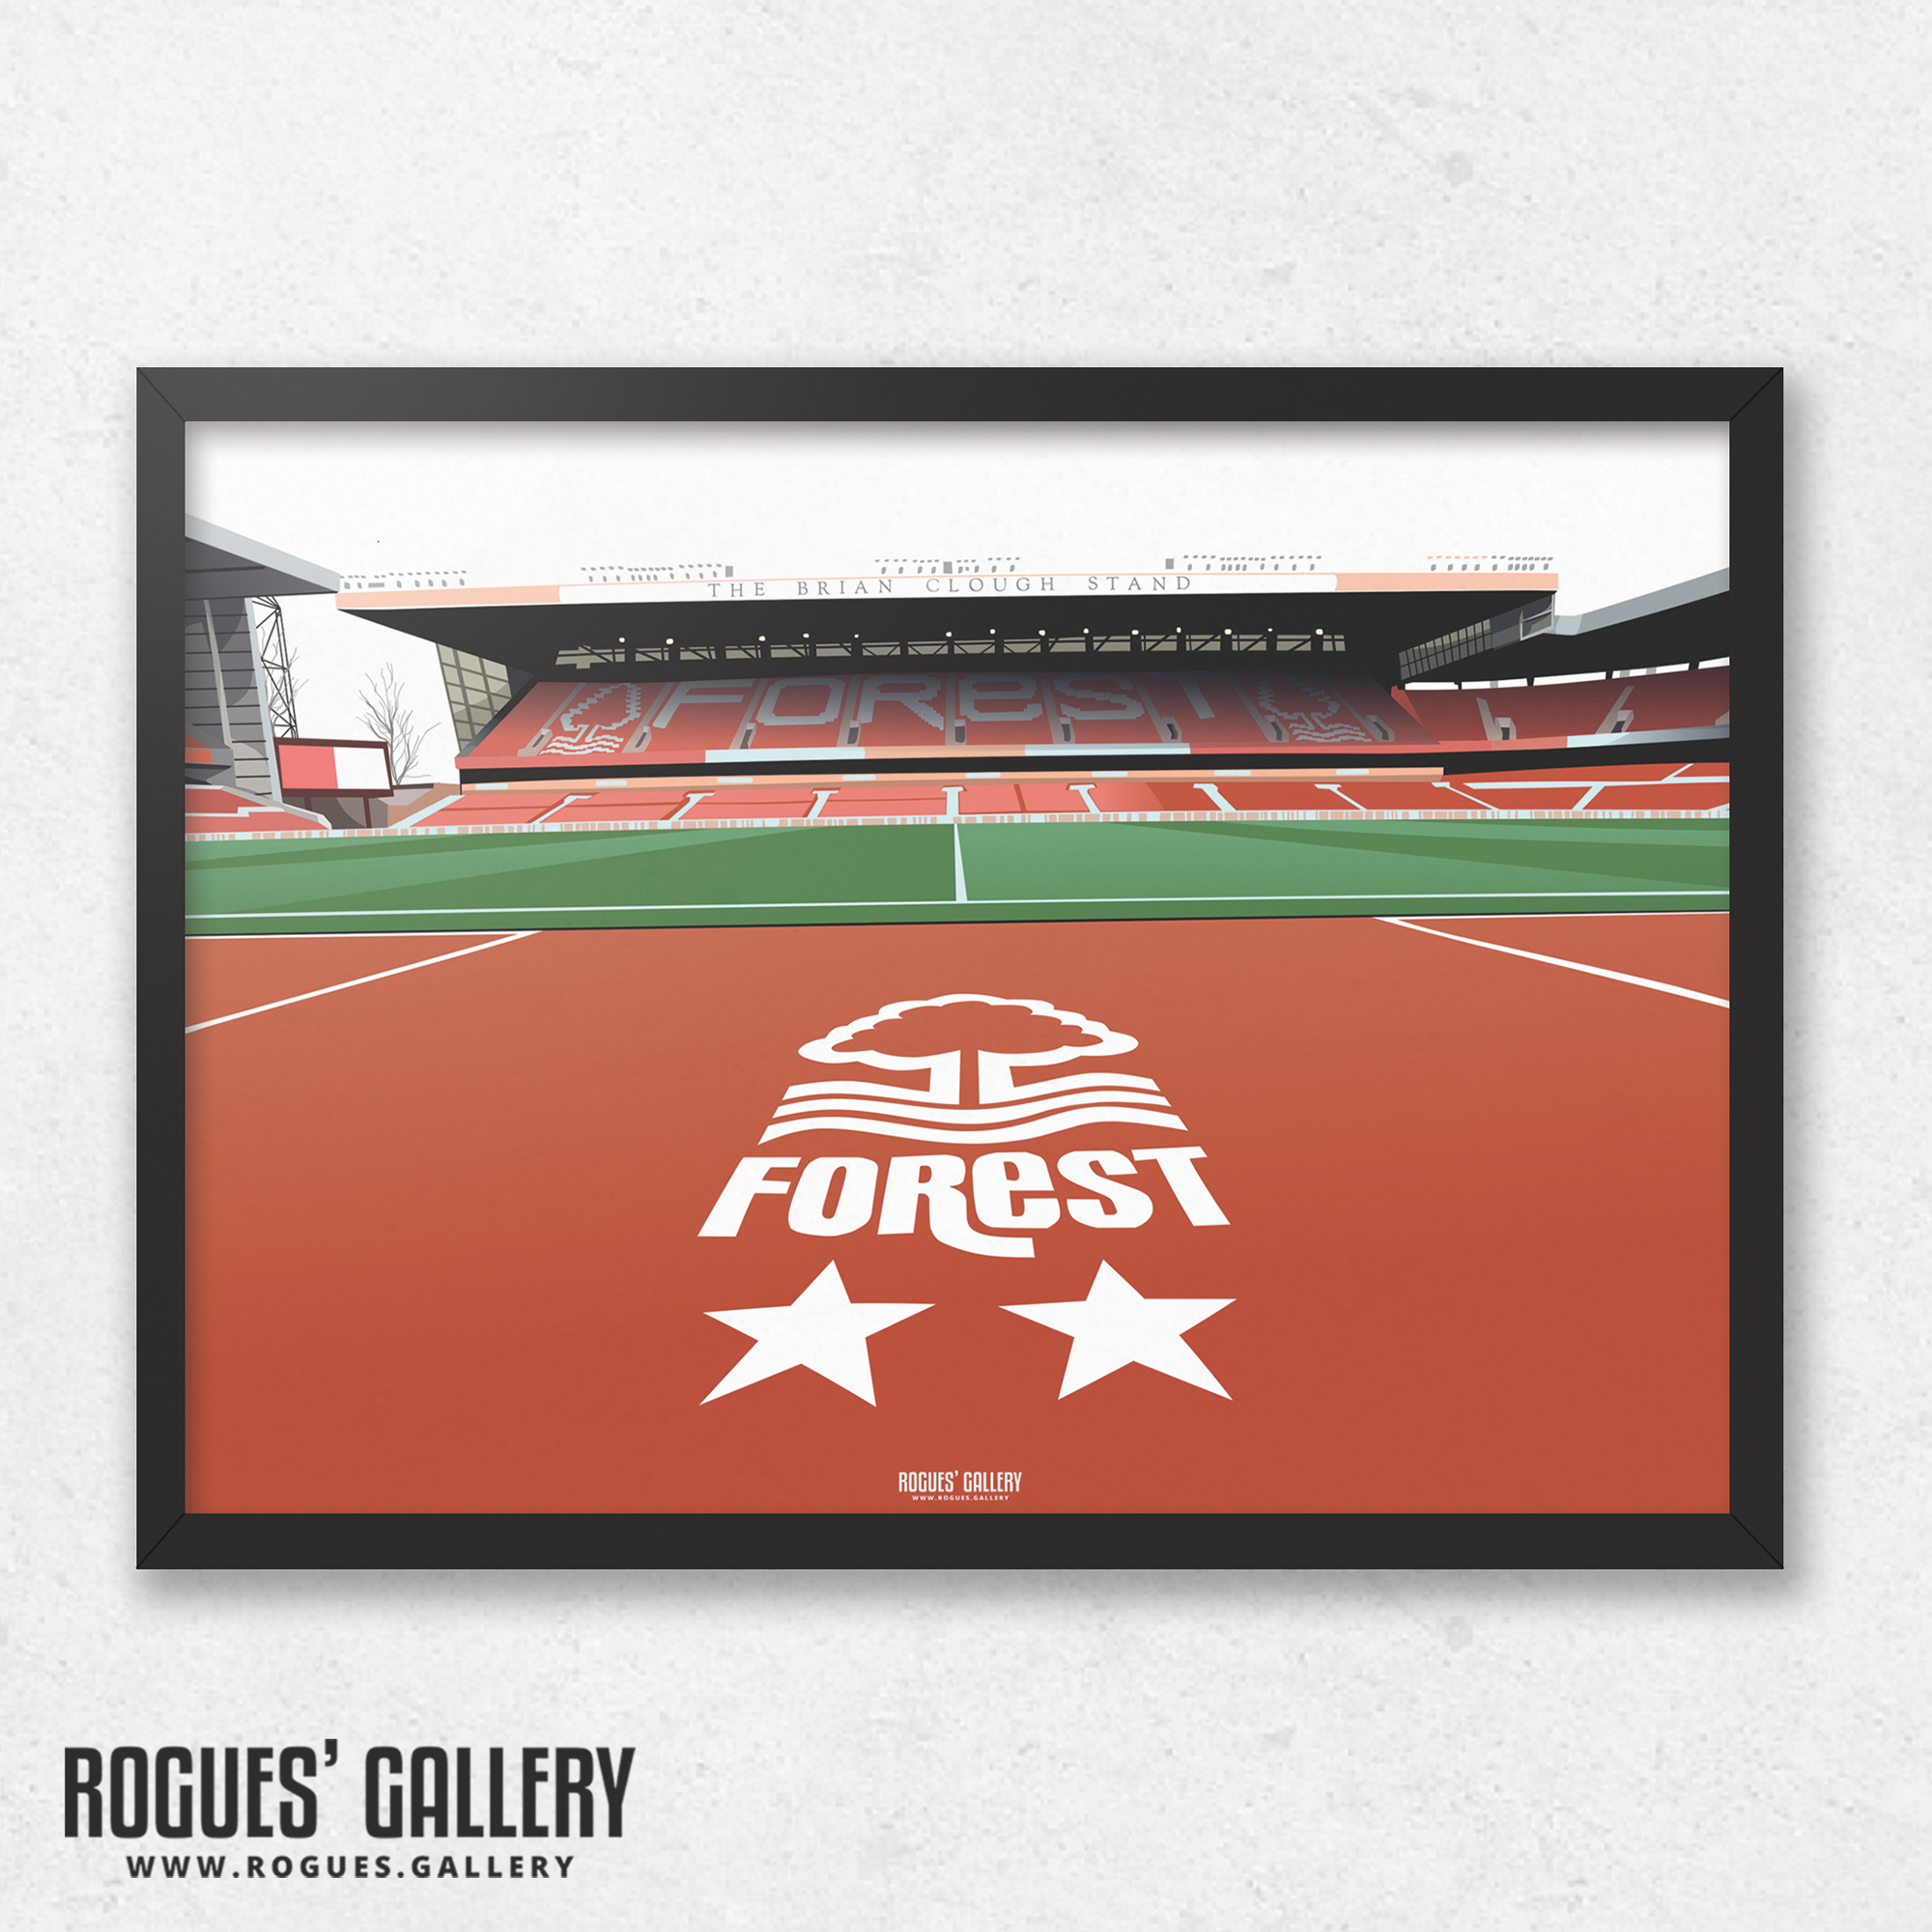 The City Ground Brian Clough Stand home of Nottingham Forest NFFC Stadium A3 print artwork edits